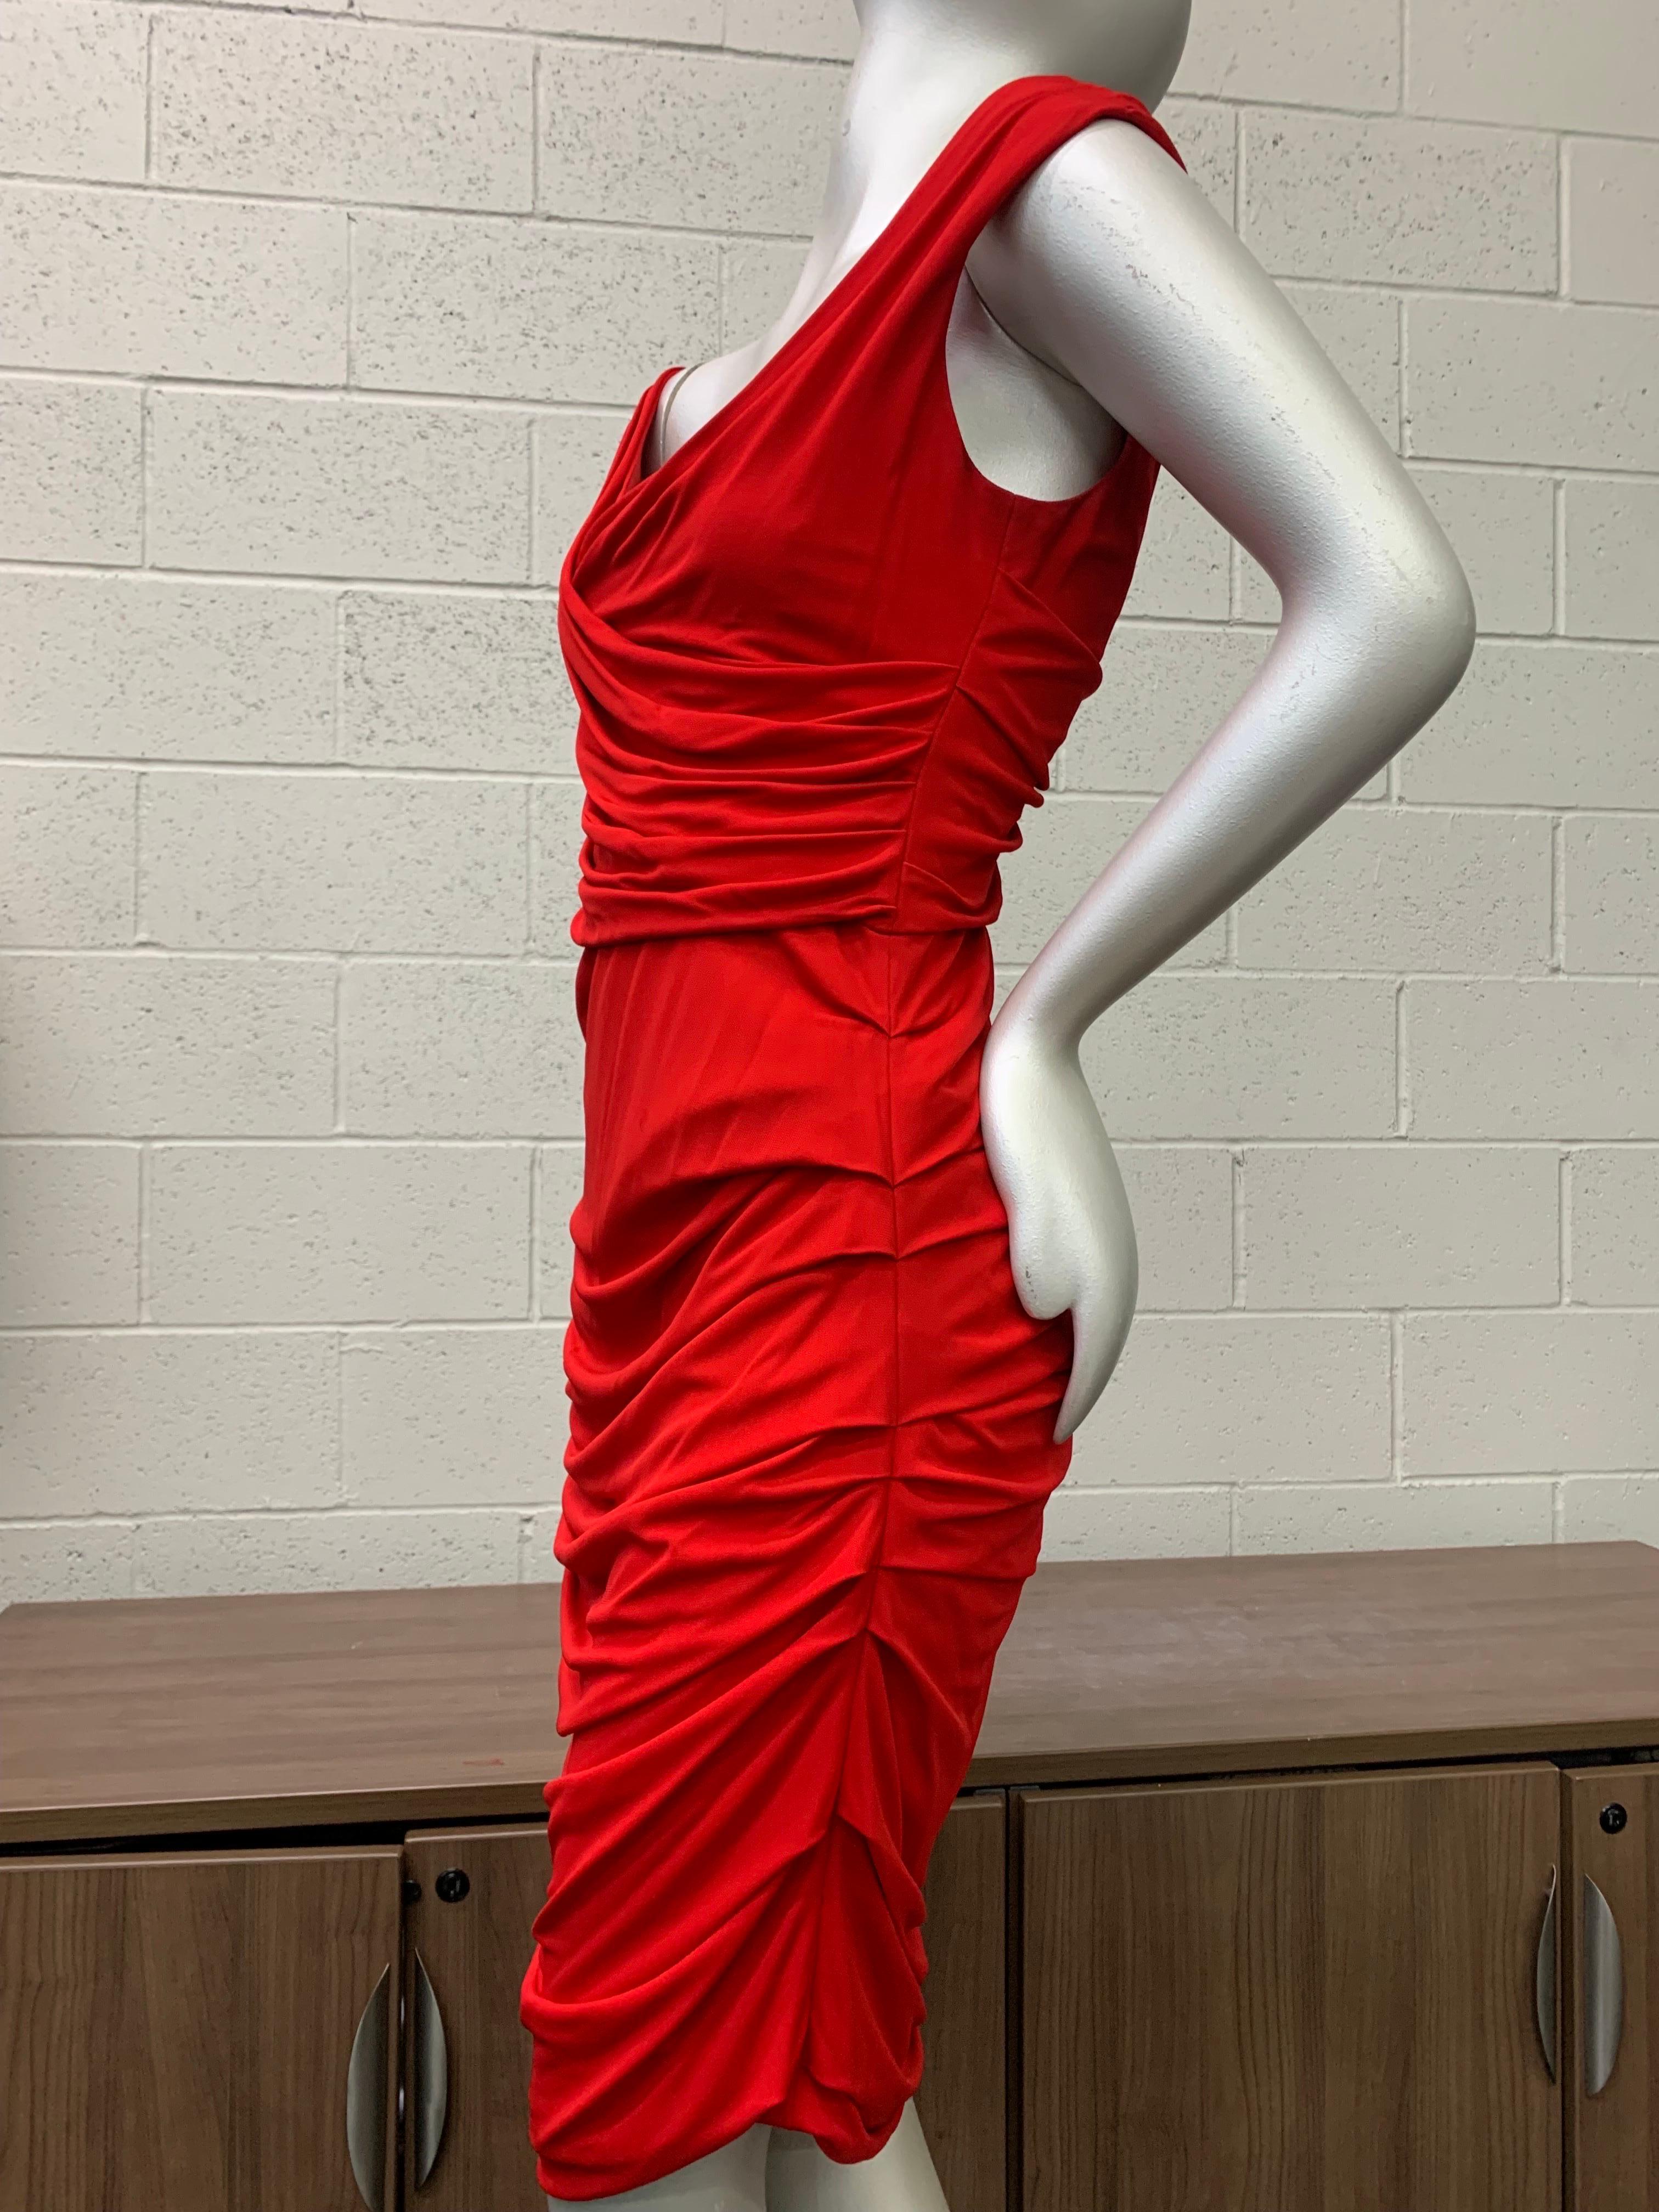 Dolce & Gabbana Cherry Red Ruched and Draped Matte Jersey Sheath Dress. Fully lined. Sexy, body-conscious, loosely draped classic chic. Back zipper. New, never worn. Size 44. 